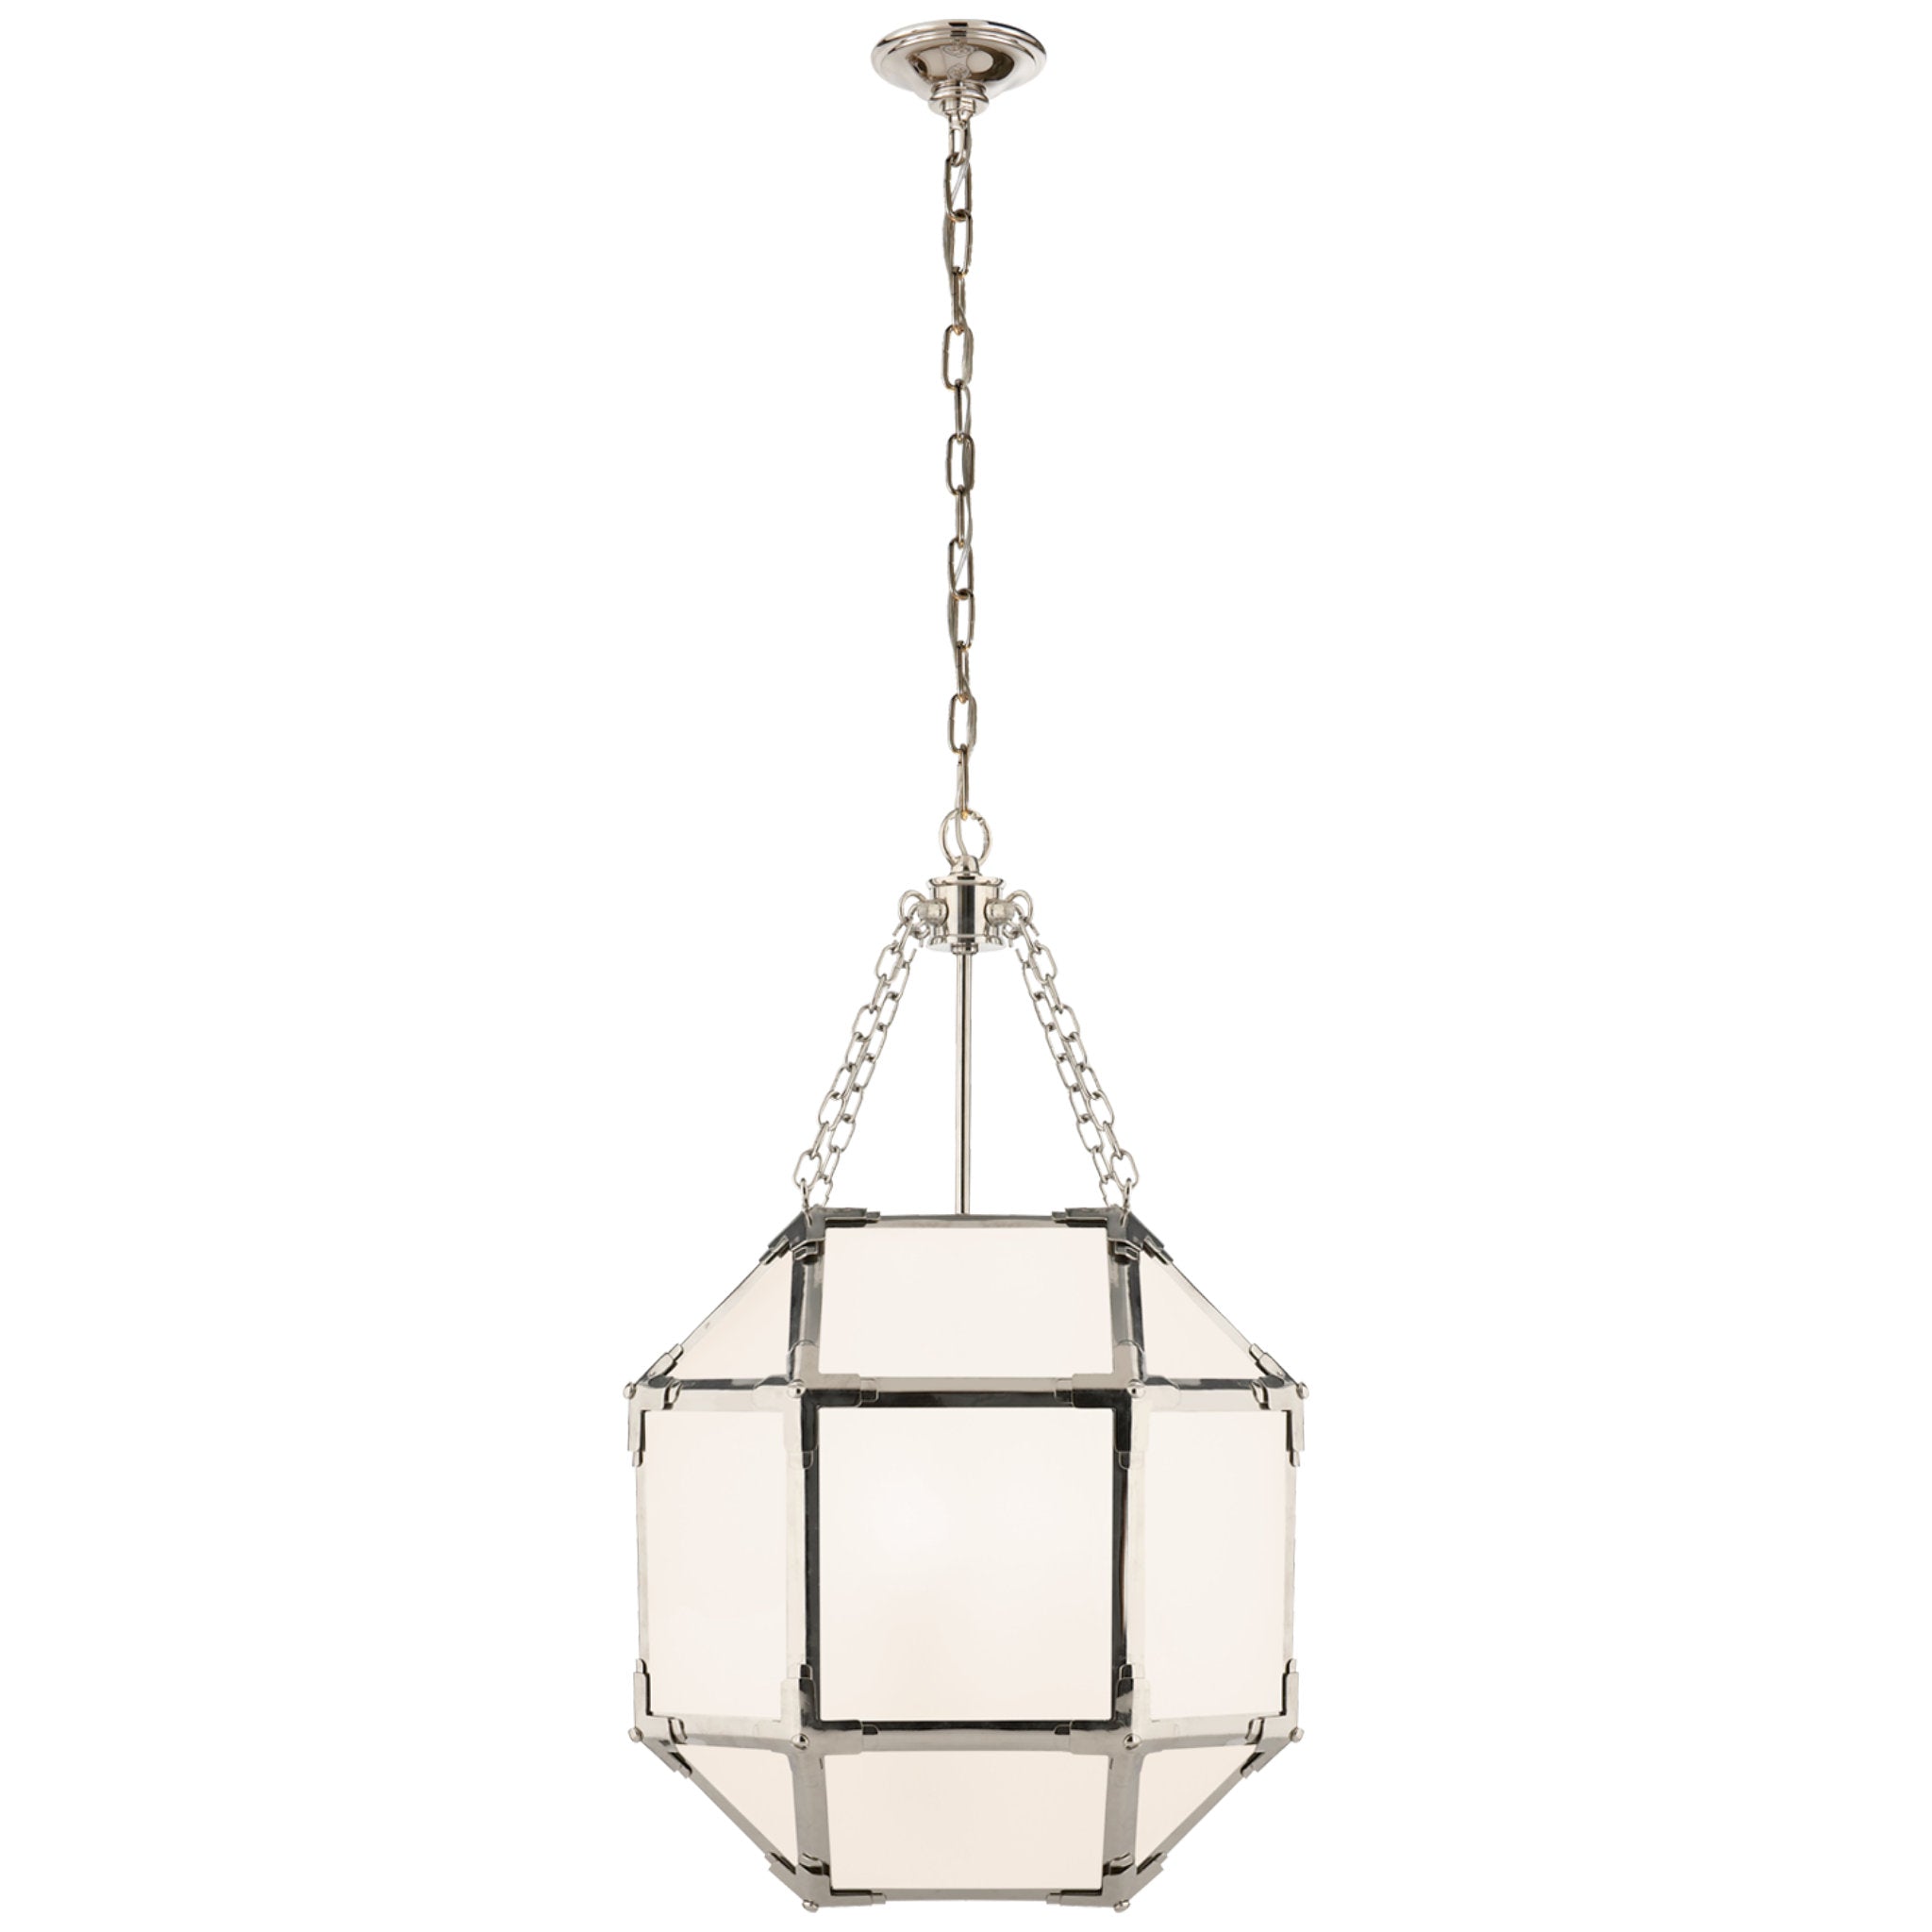 Suzanne Kasler Morris Small Lantern in Polished Nickel with White Glass